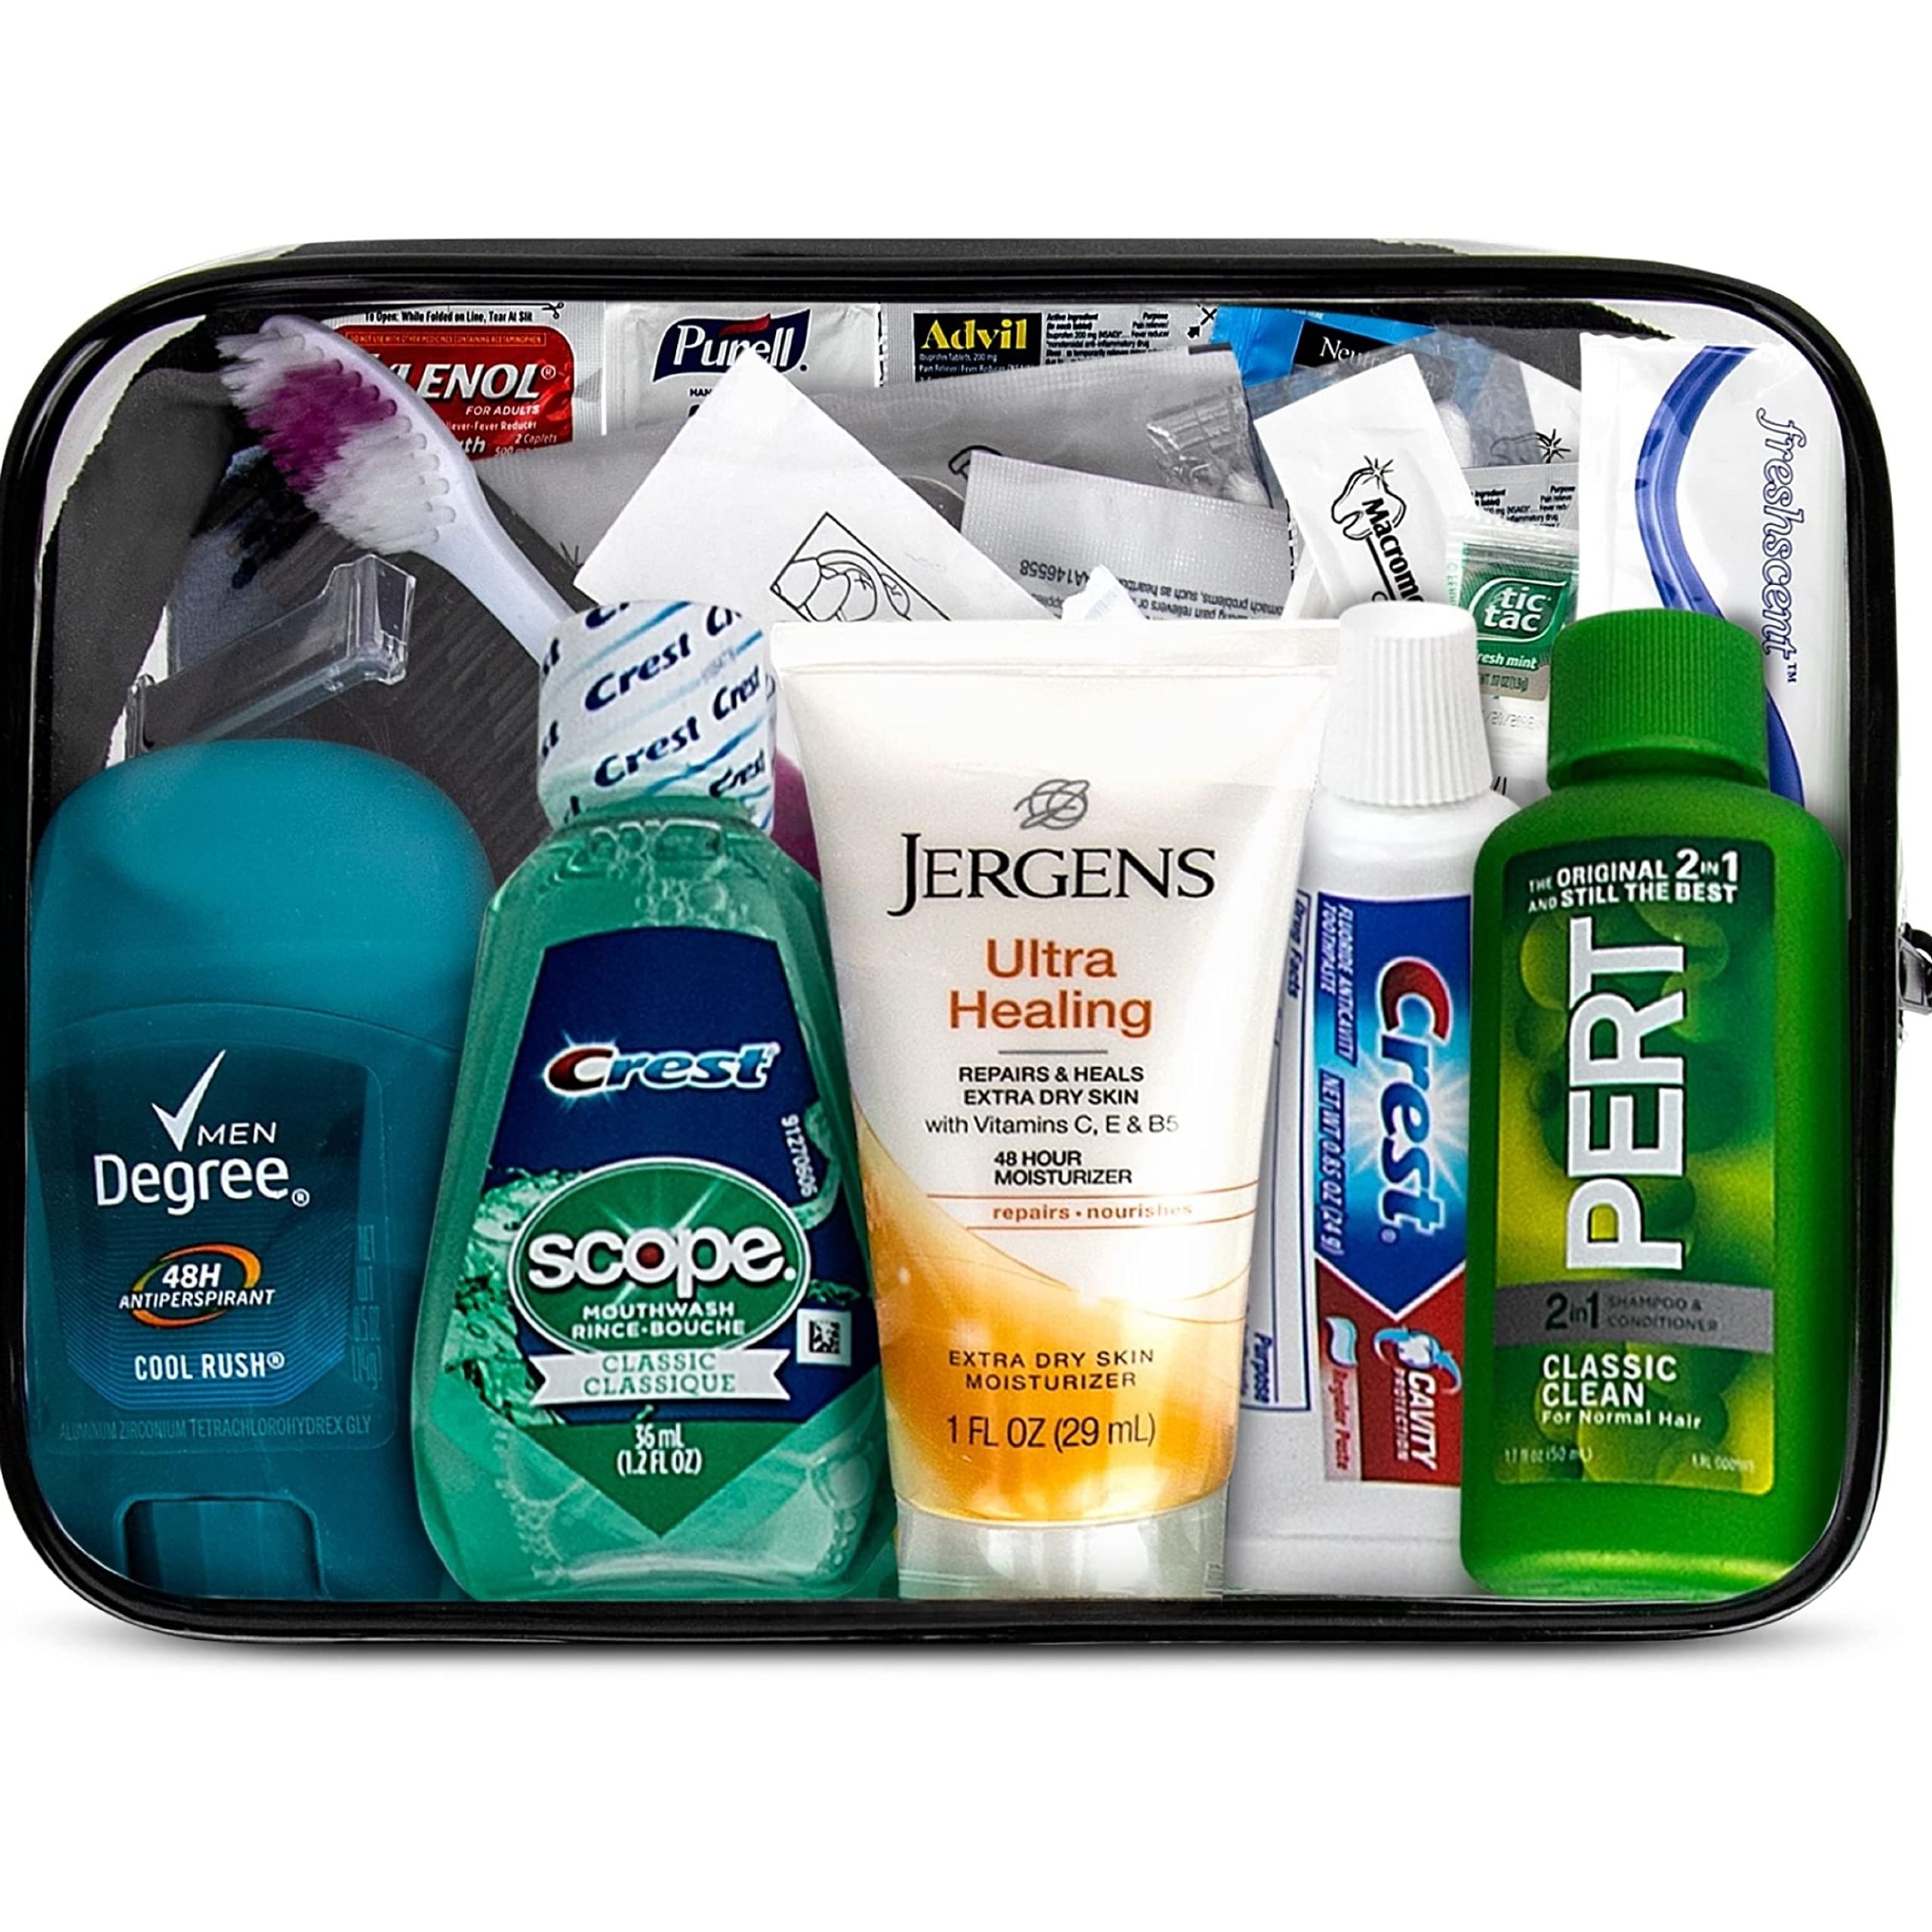 TrekTote 20-Piece Travel Toiletry Convenience Kit - Personal Care Travel  Hygiene Essentials Bag with Unisex Toiletries. TSA-Approved Travel Size Kit